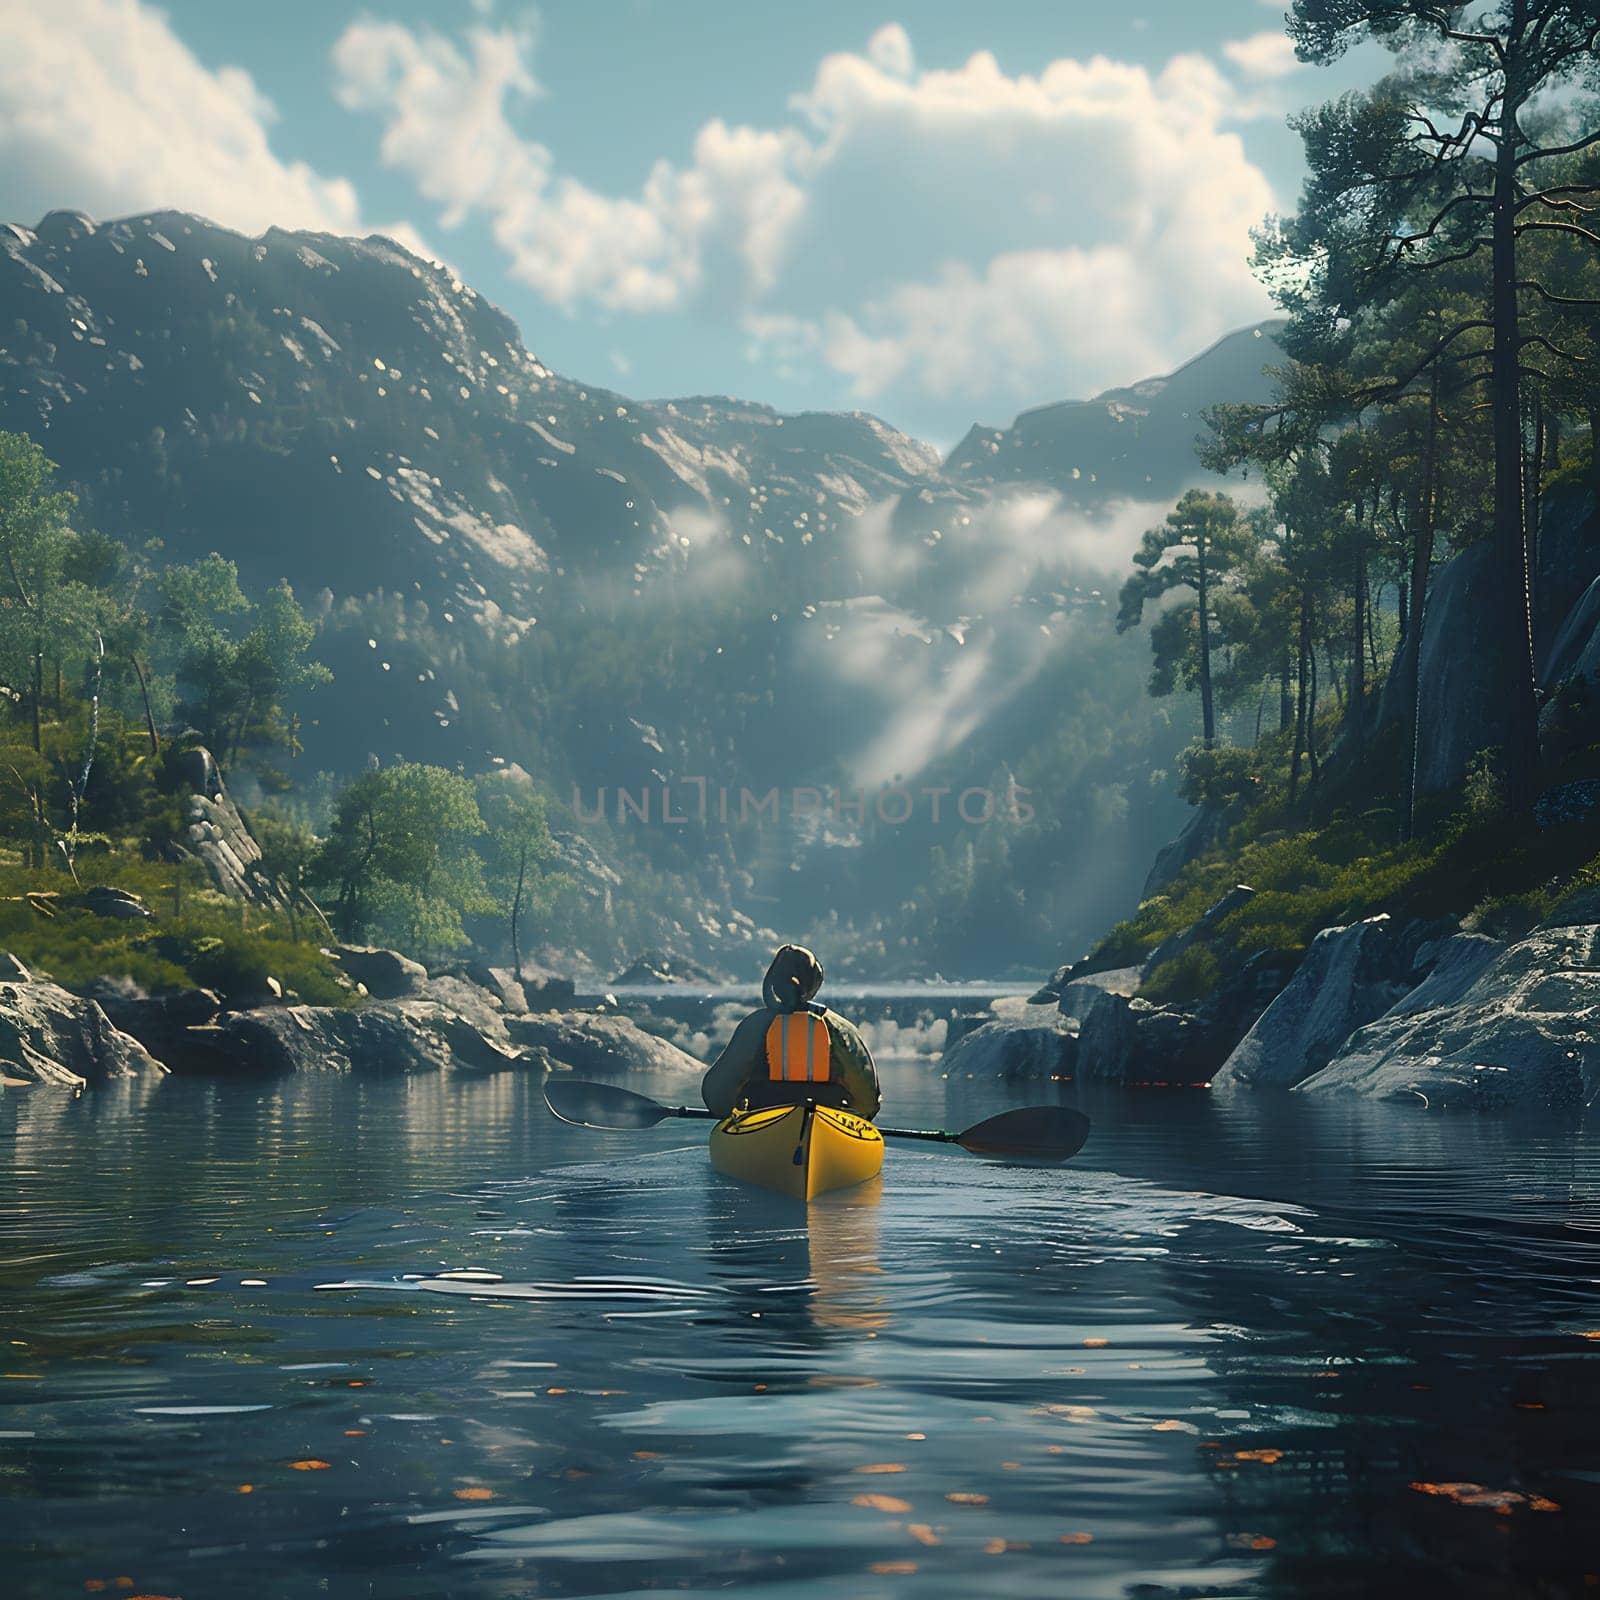 A man paddles his yellow kayak down a serene river, surrounded by majestic mountains, with the sky filled with fluffy clouds overhead